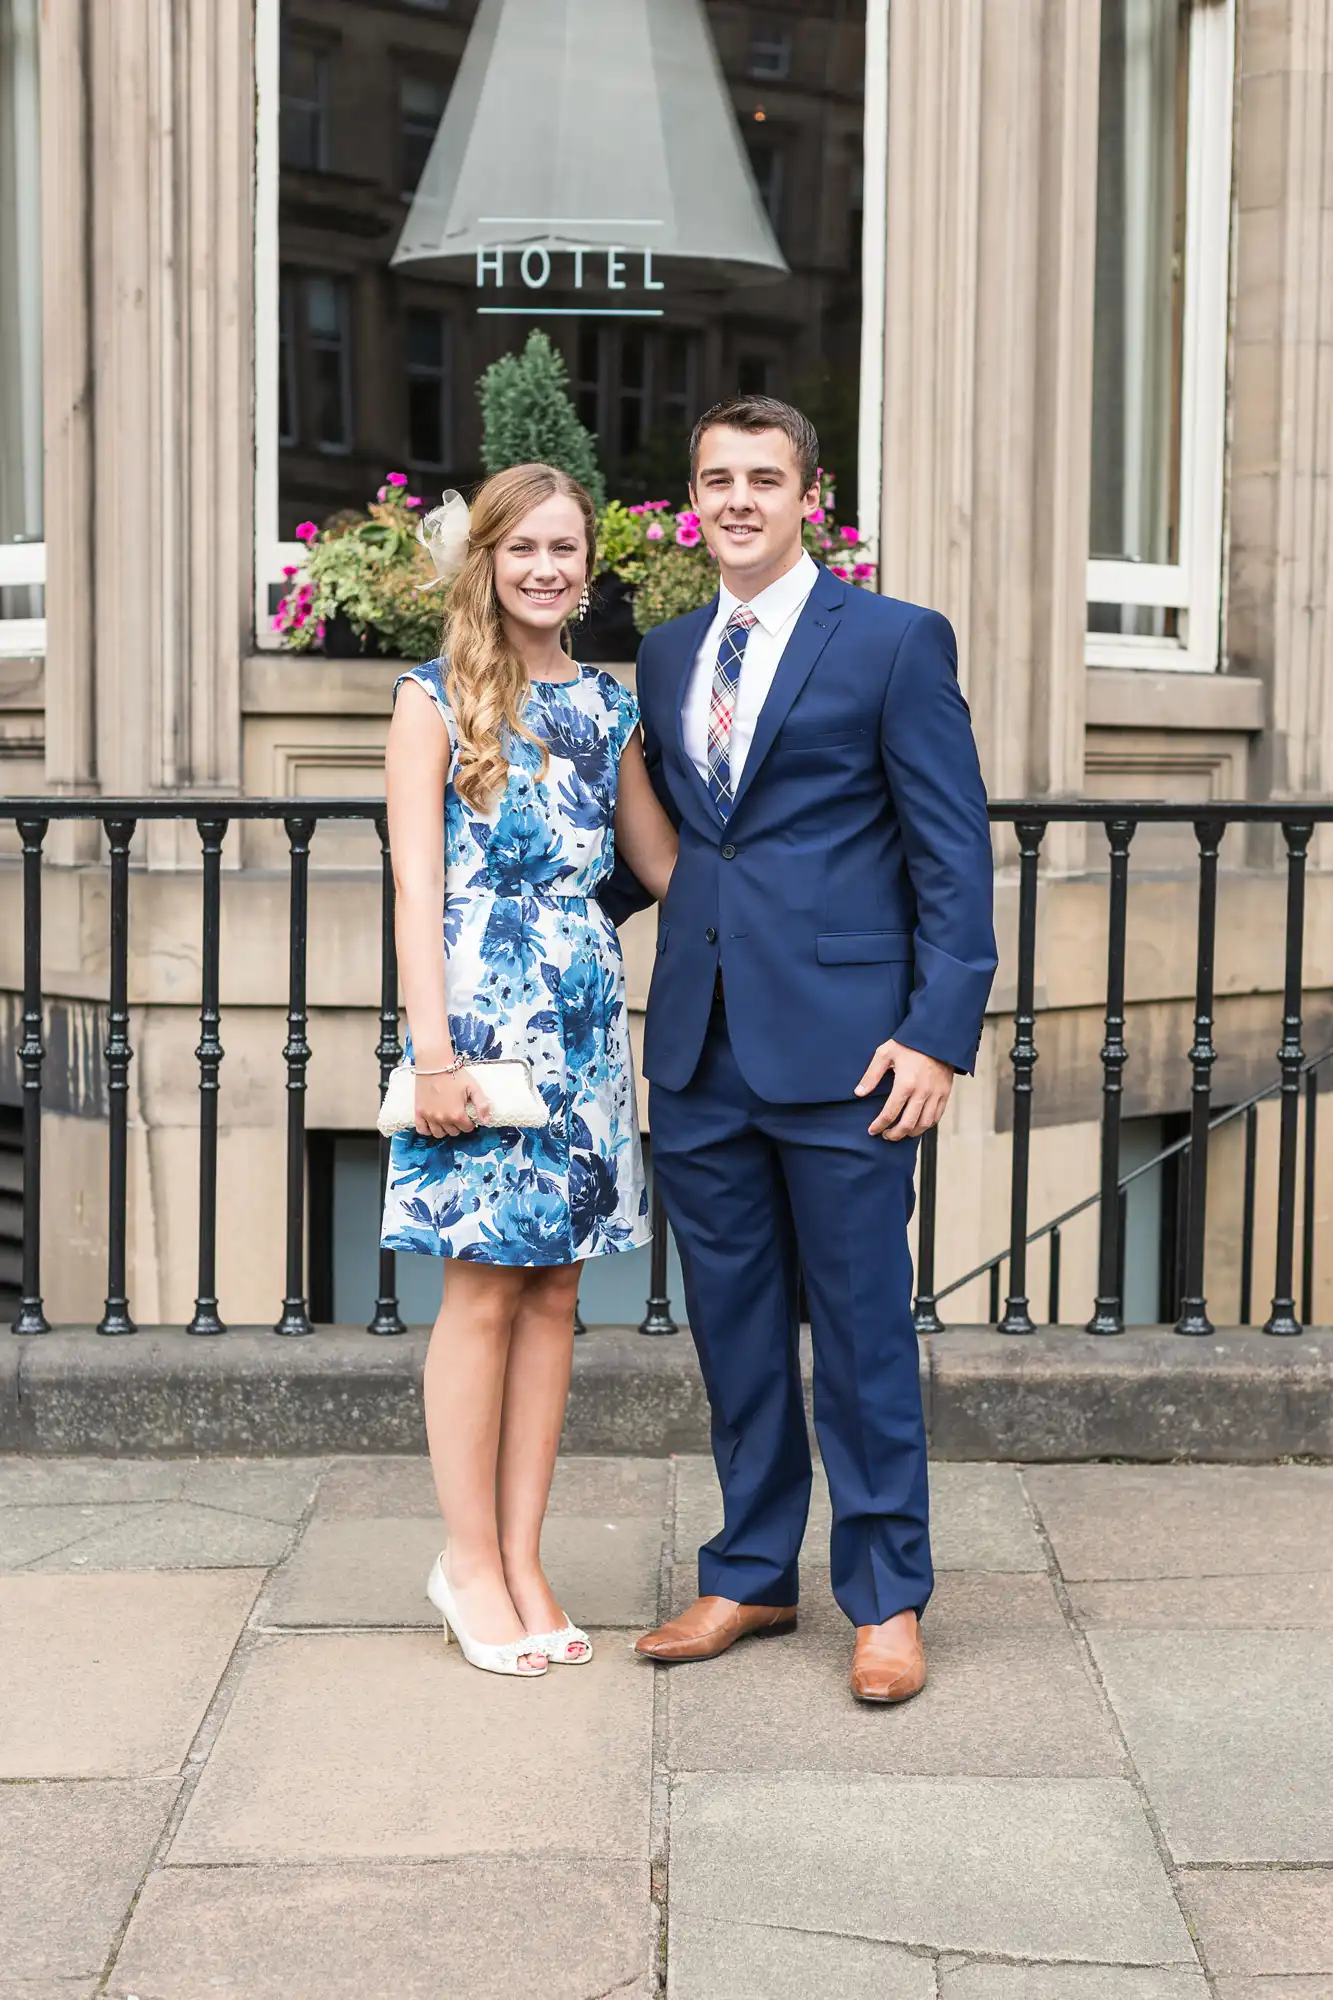 A young couple smiling and standing in front of a hotel, with the woman wearing a floral blue dress and the man in a blue suit.